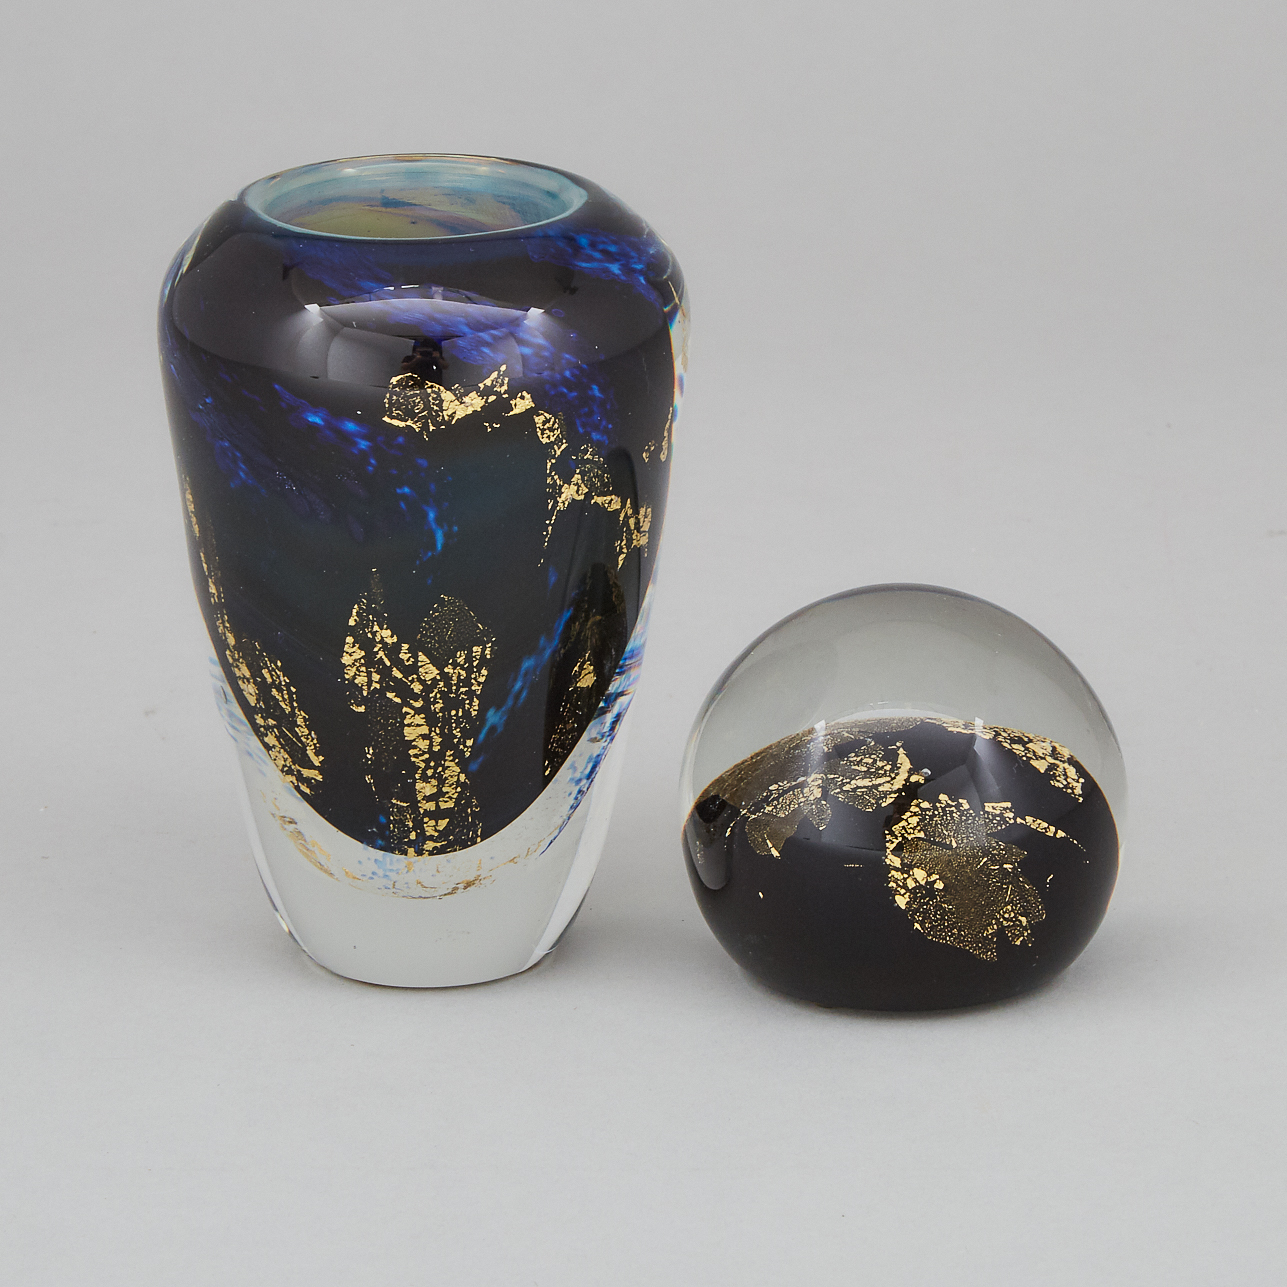 Toan Klein (American/Canadian, b.1949), Internally Decorated Glass Vase and Paperweight, 1986/87